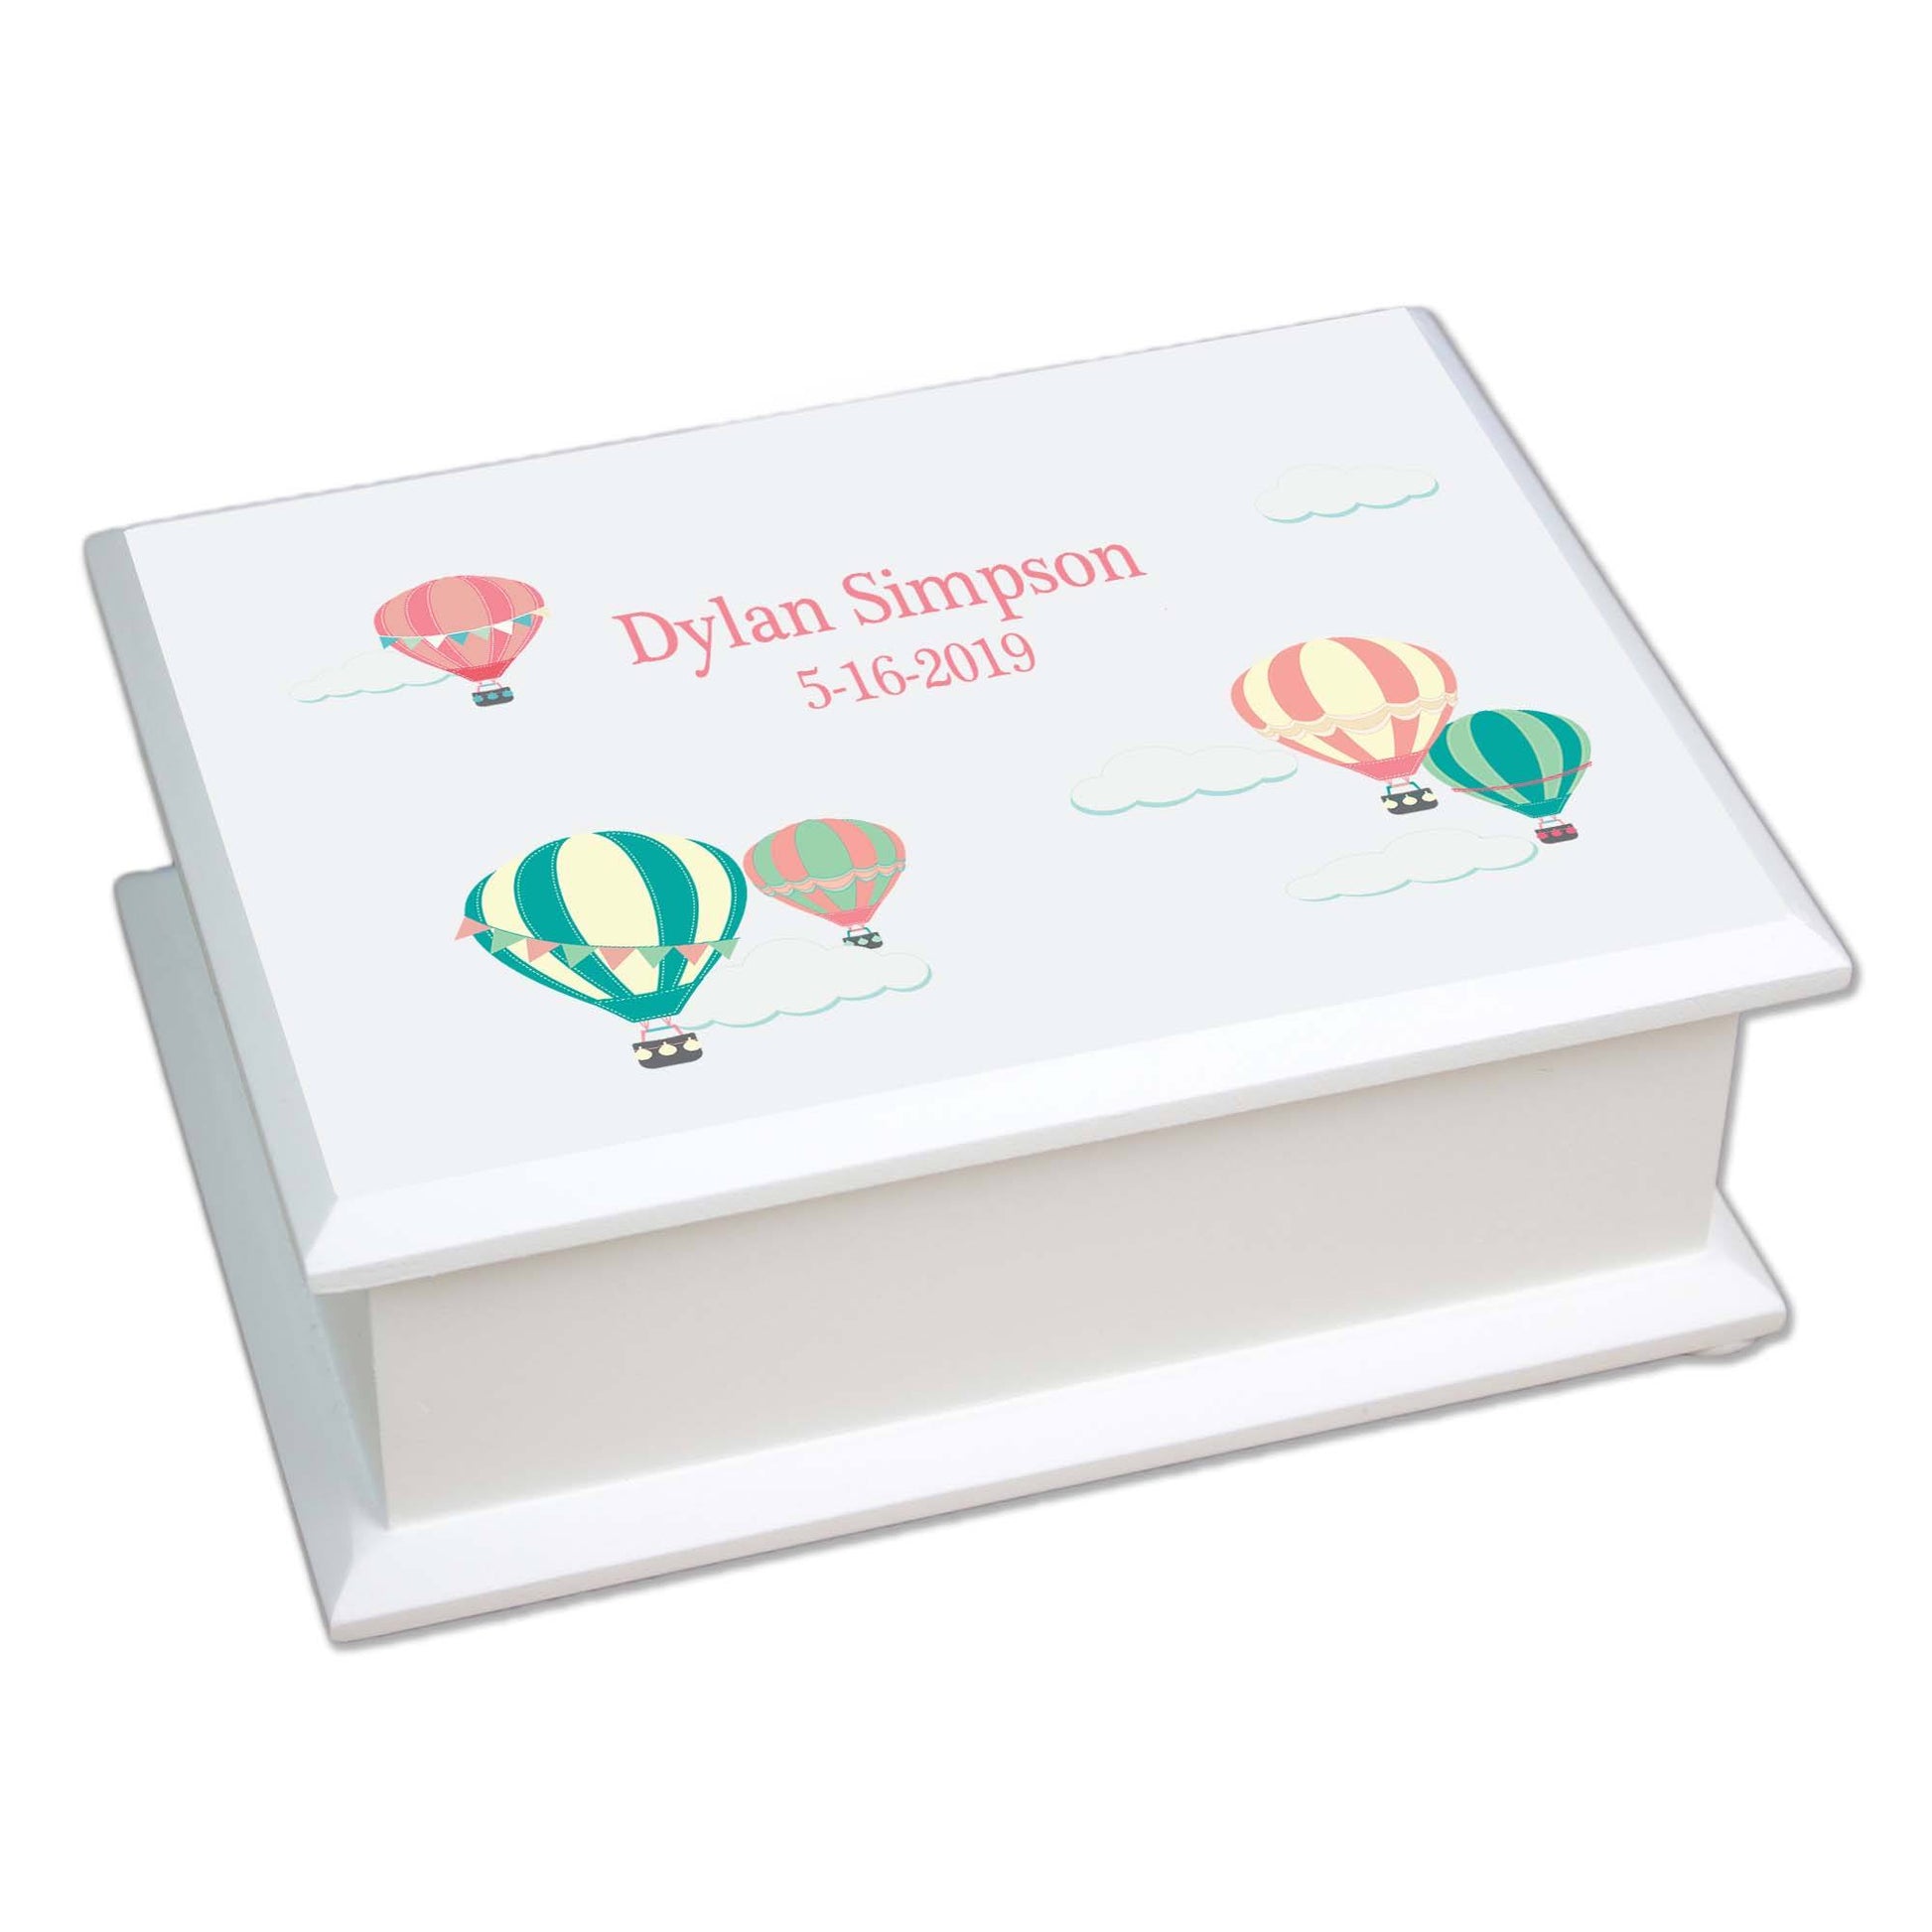 Personalized Lift Top Jewelry Box with Hot Air Balloon design